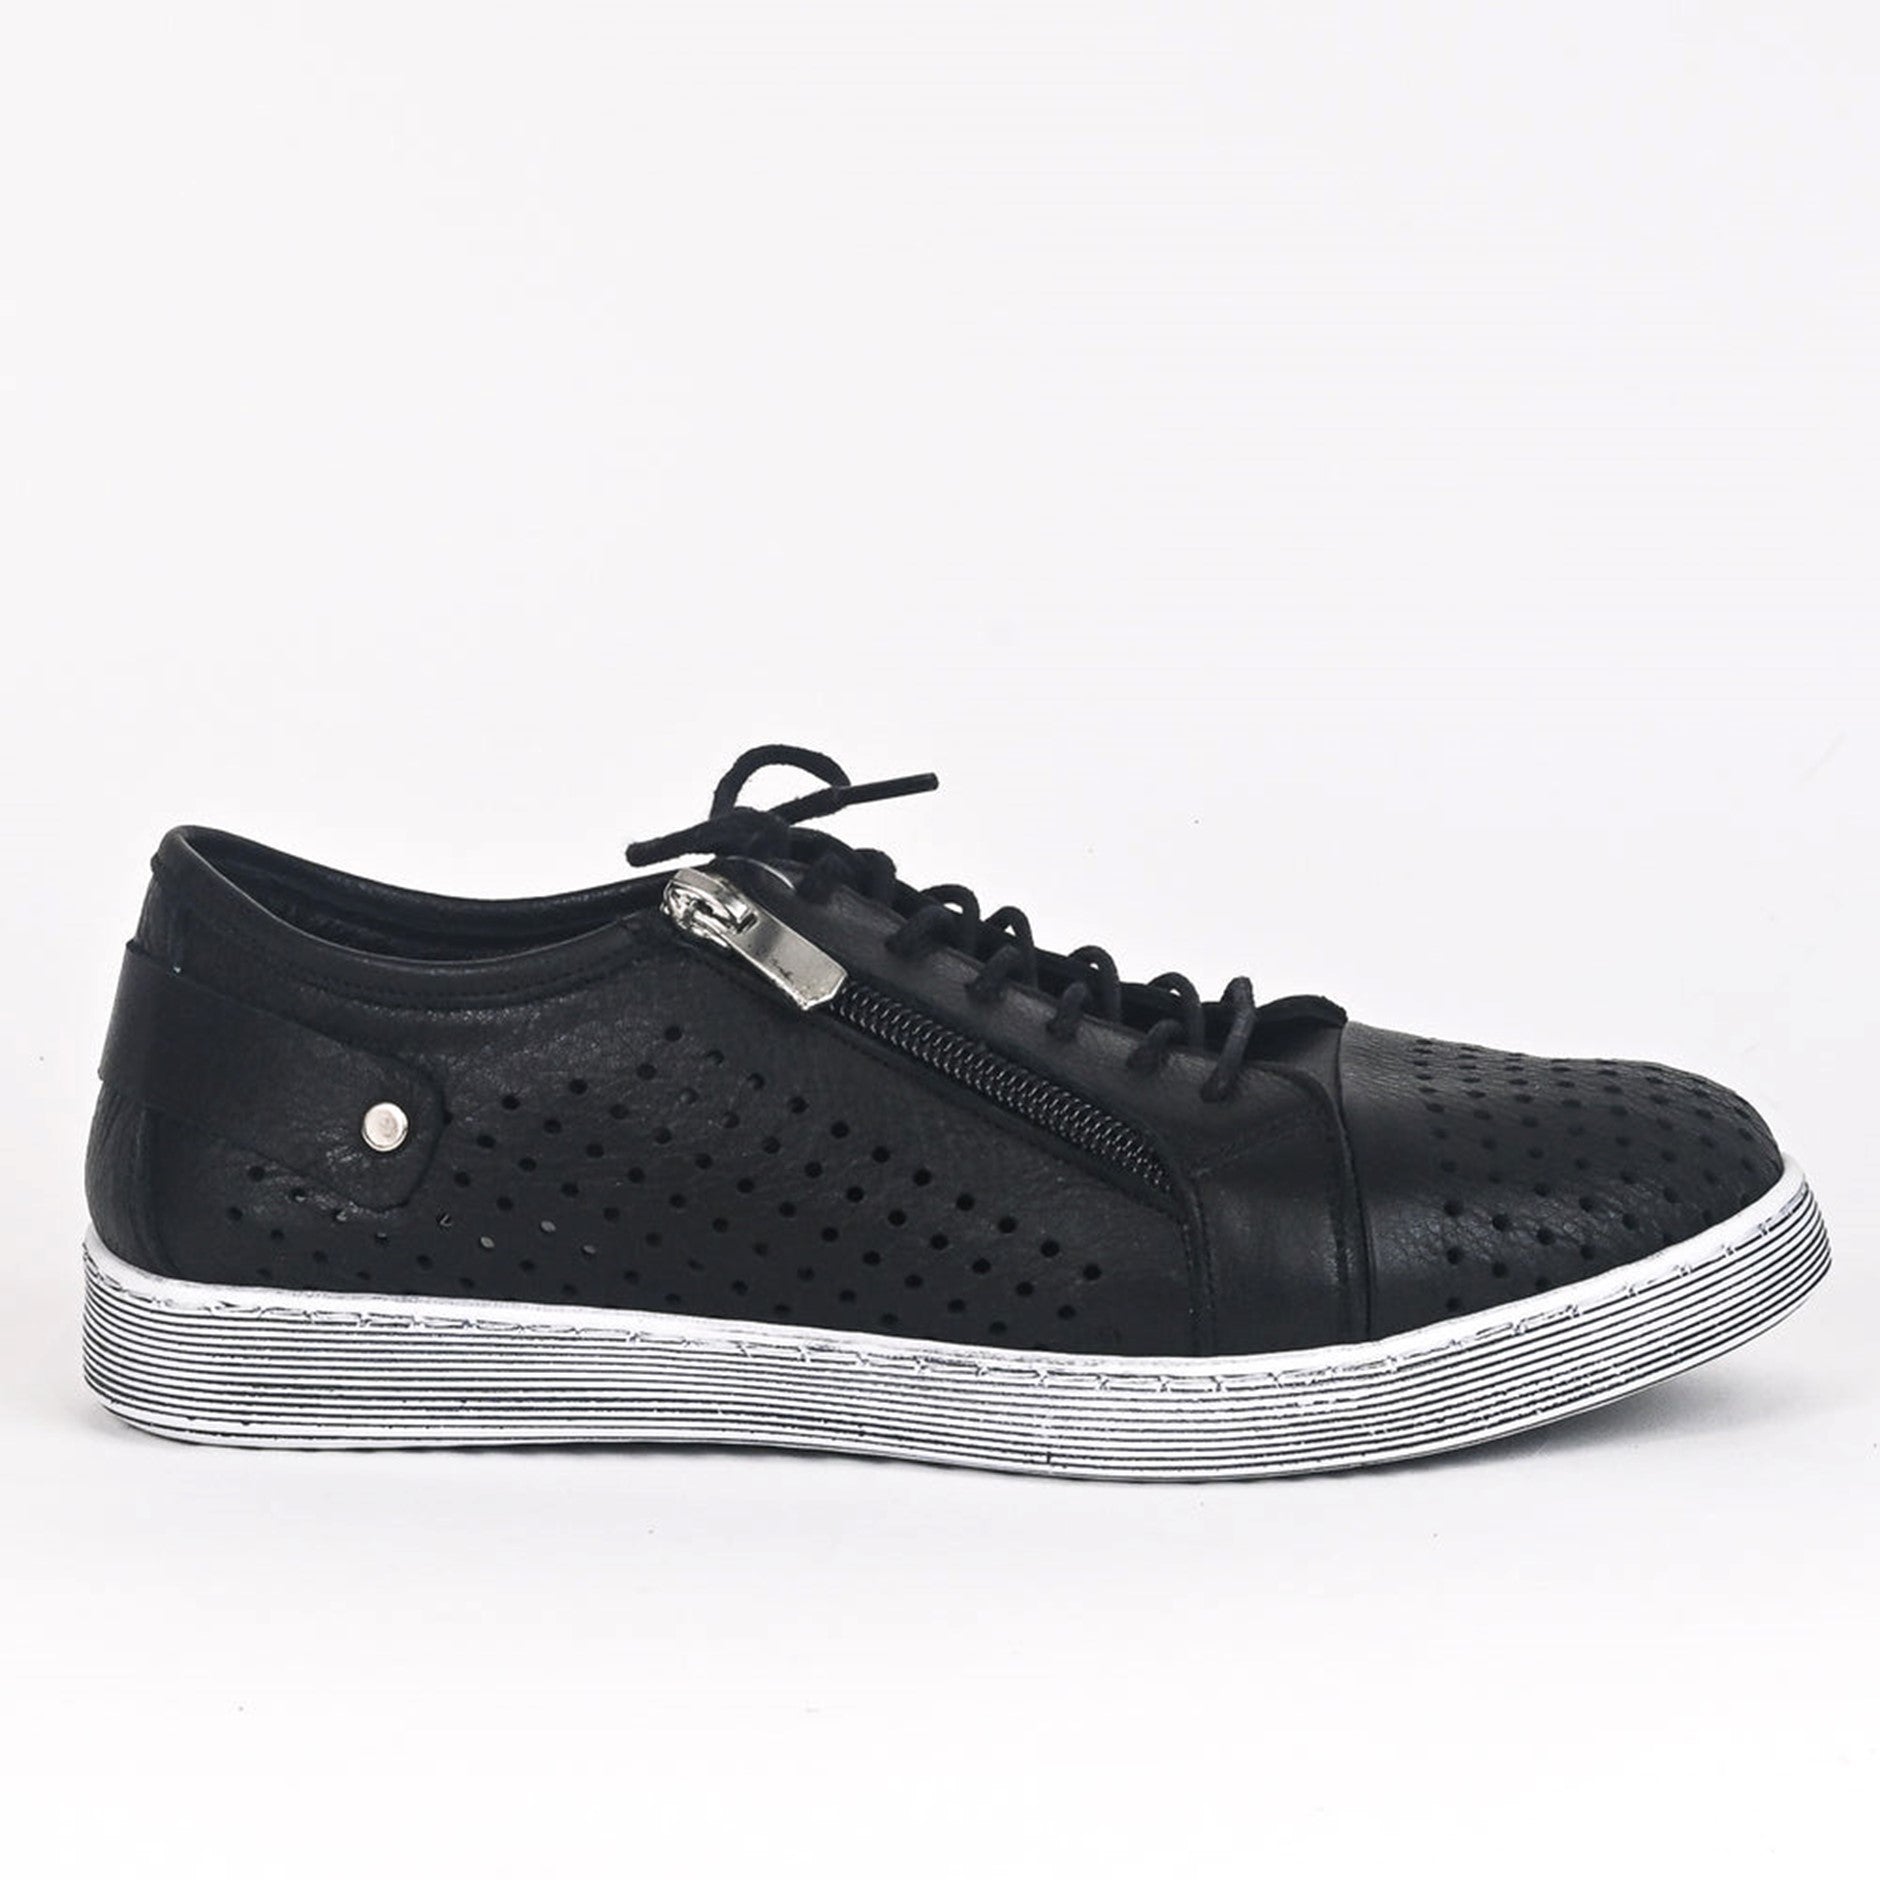 EG17-Top selling super soft Turkish leather perforated sneaker with side zip